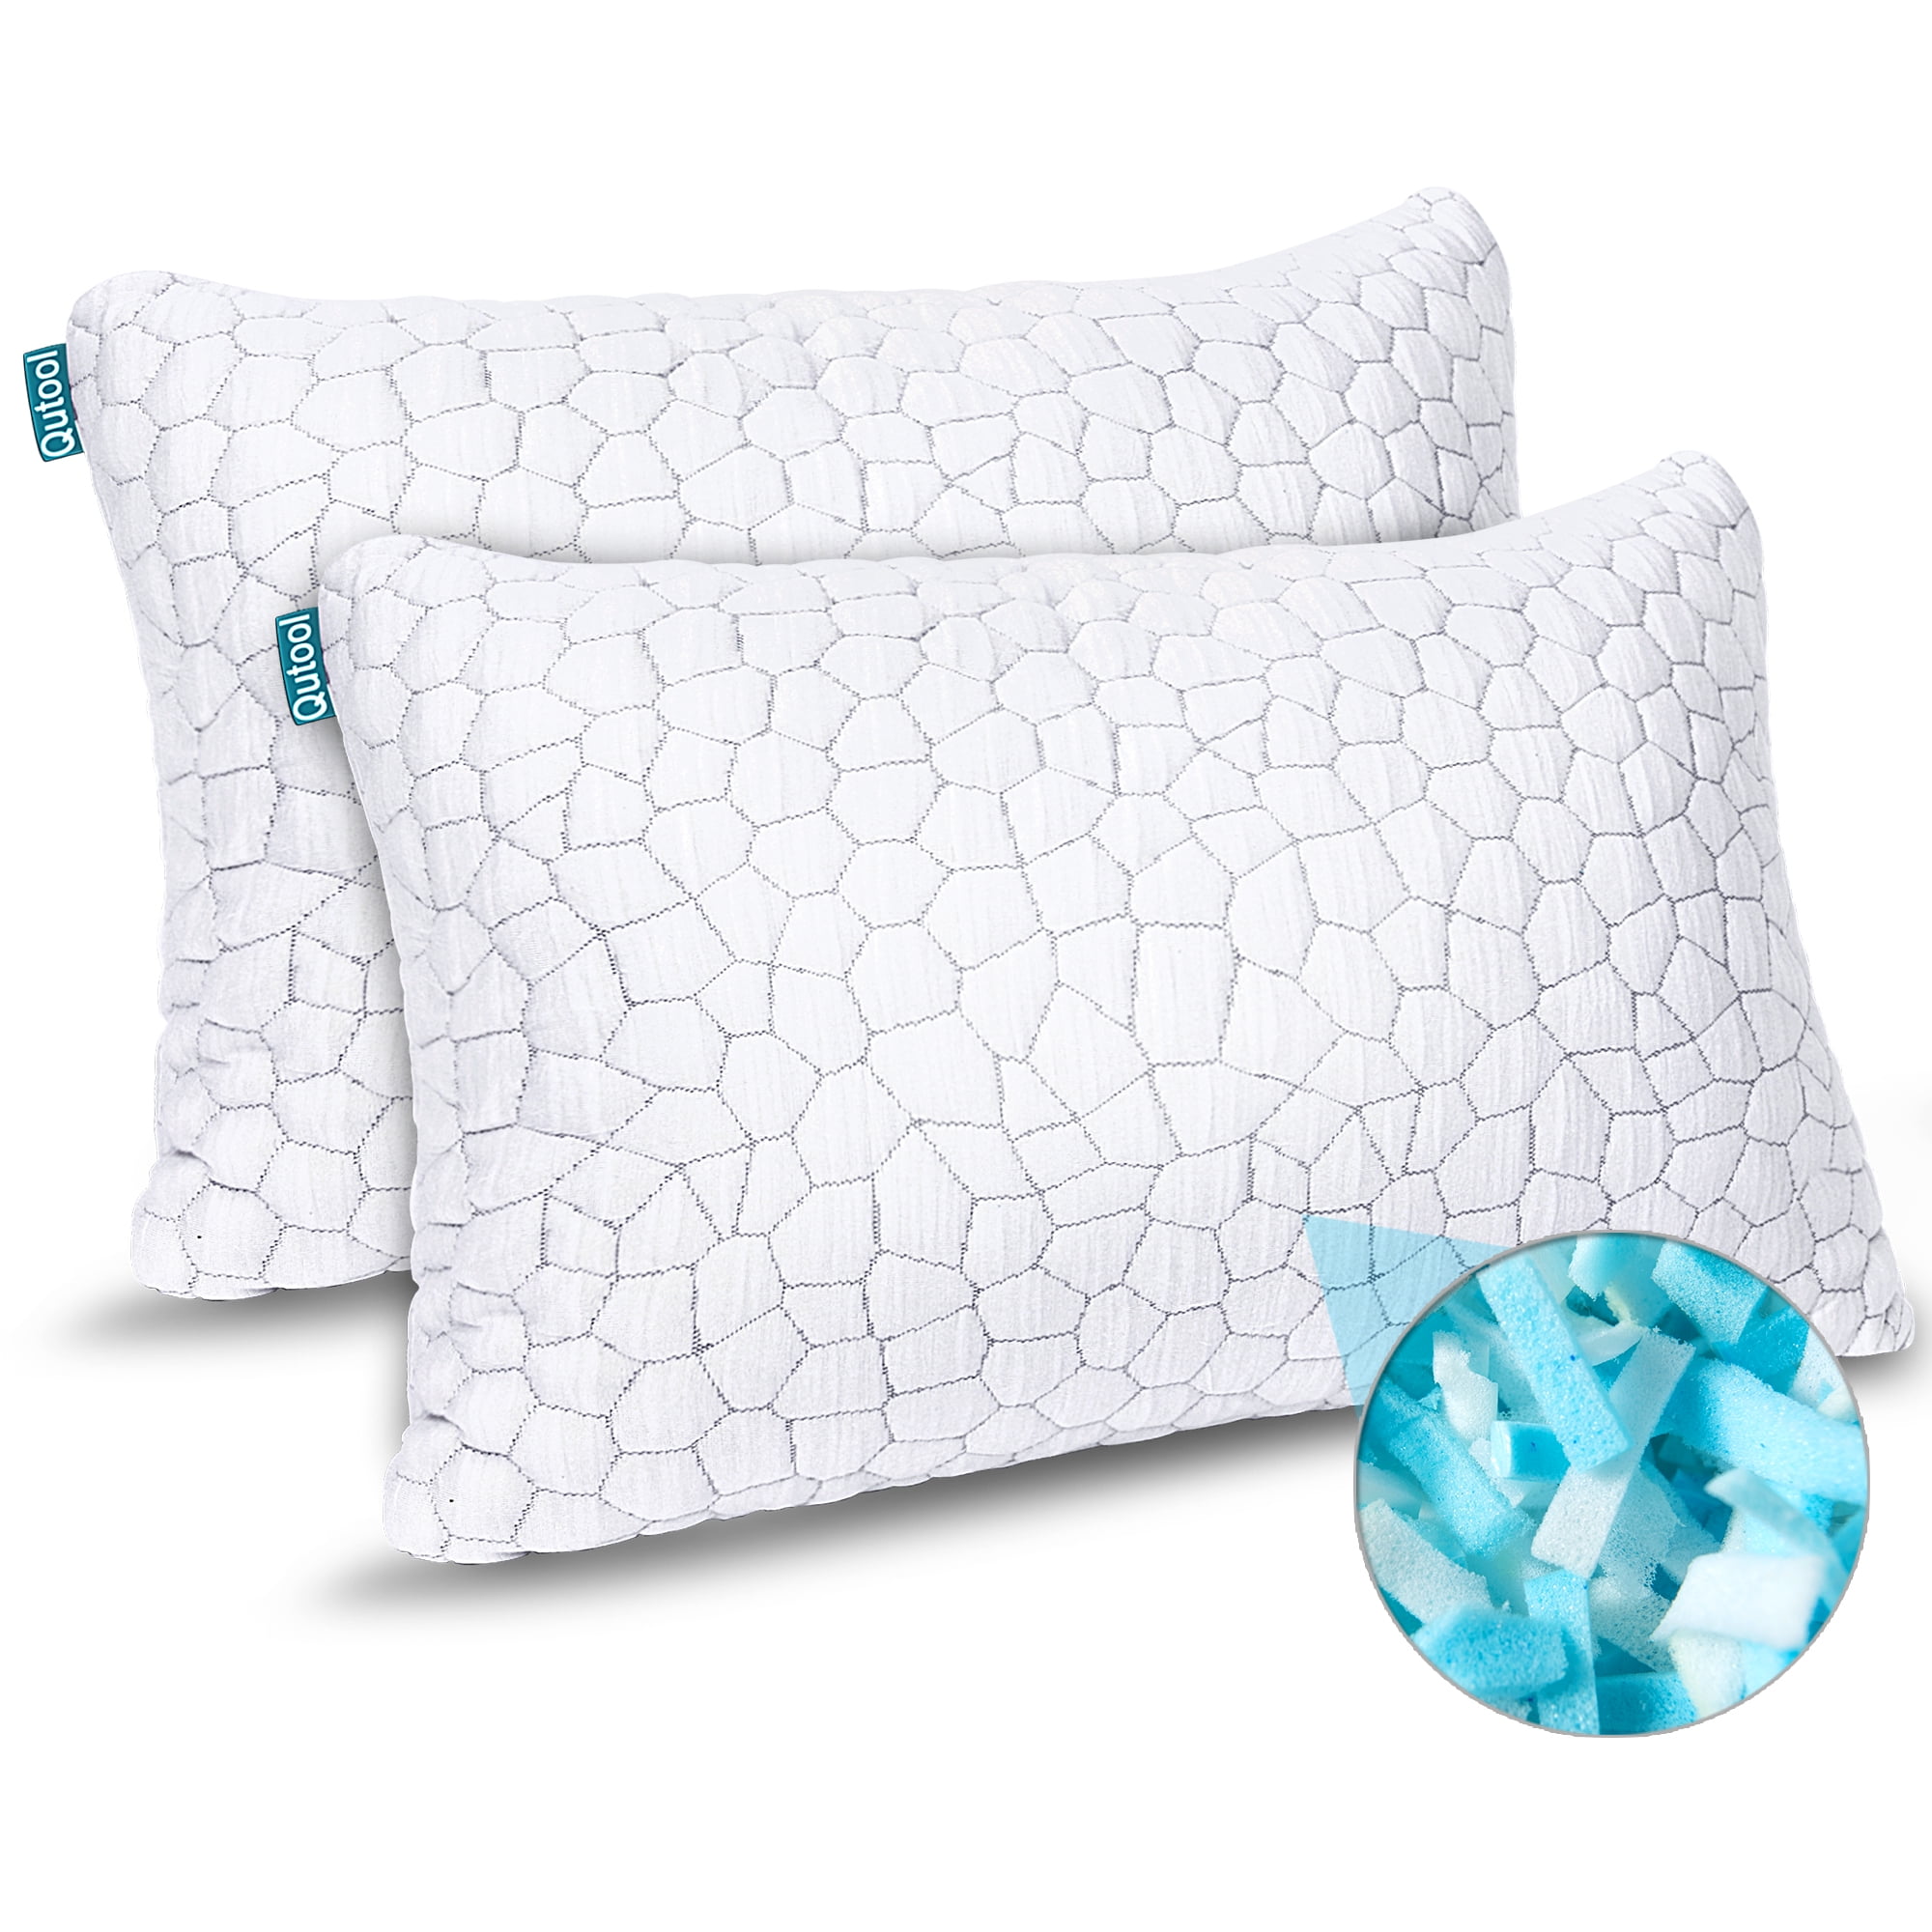 Details about   LANGRIA Luxury Bamboo Shredded Memory Foam CertiPUR-US Approved Queen Size 